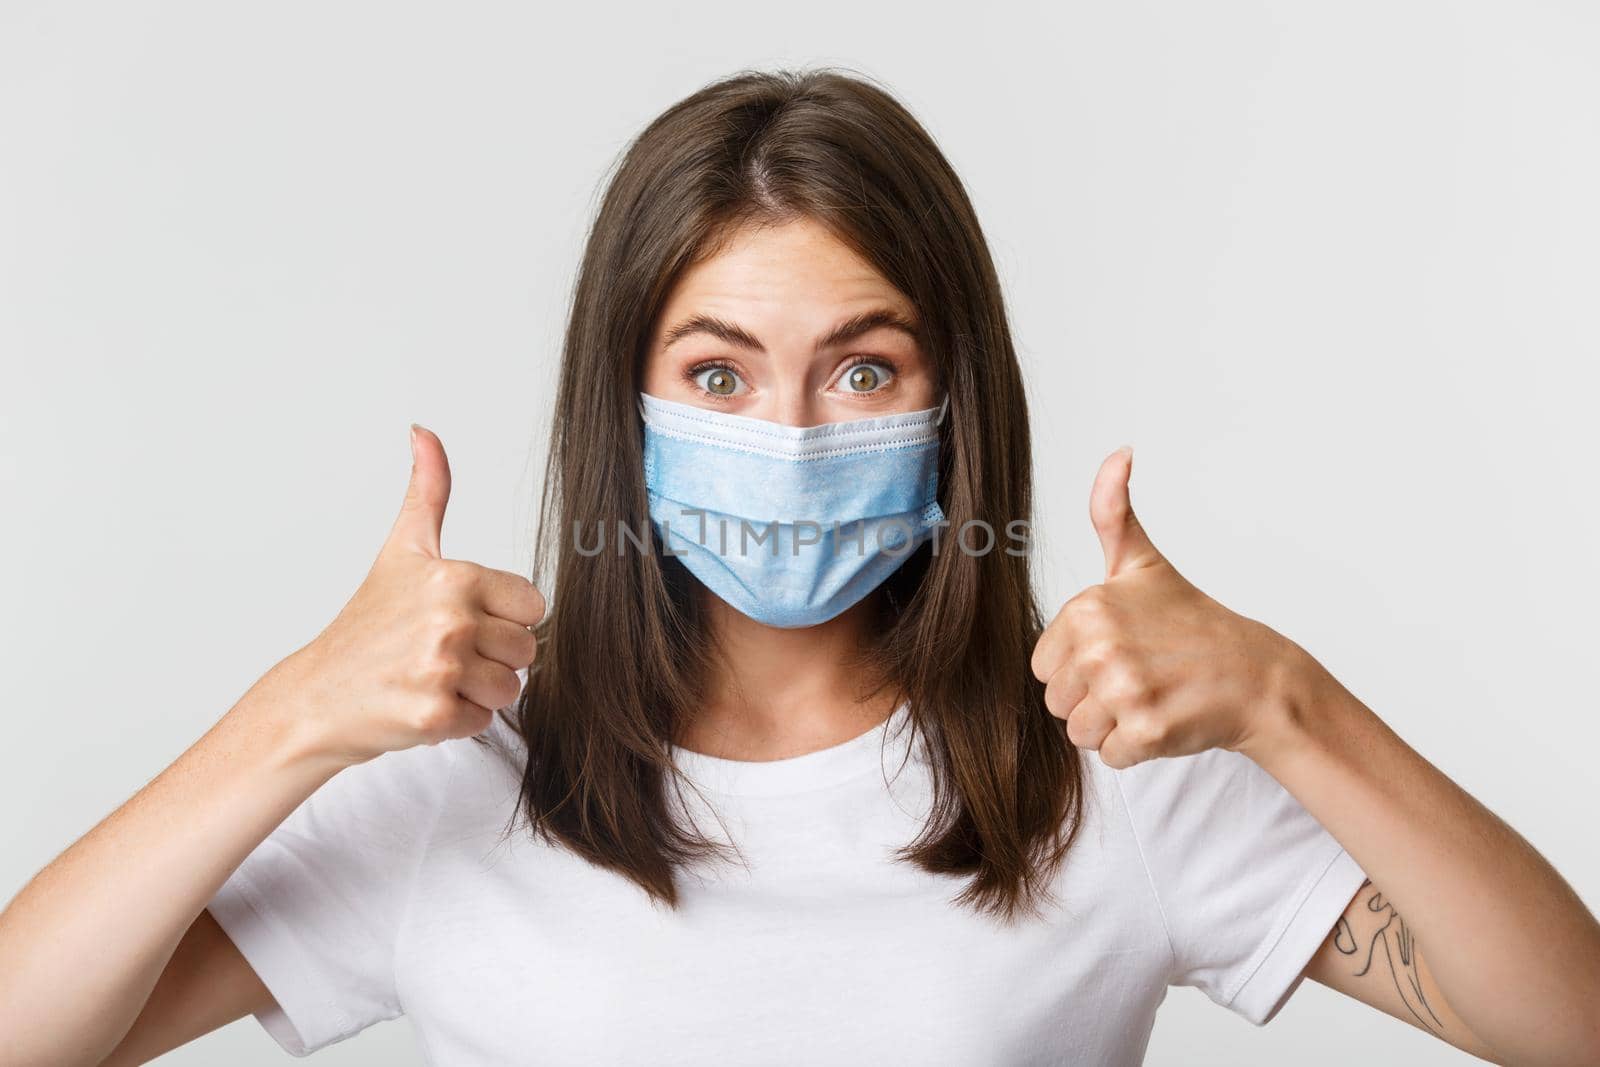 Covid-19, health and social distancing concept. Close-up of pleased attractive girl in medical mask showing thumbs-up in approval.